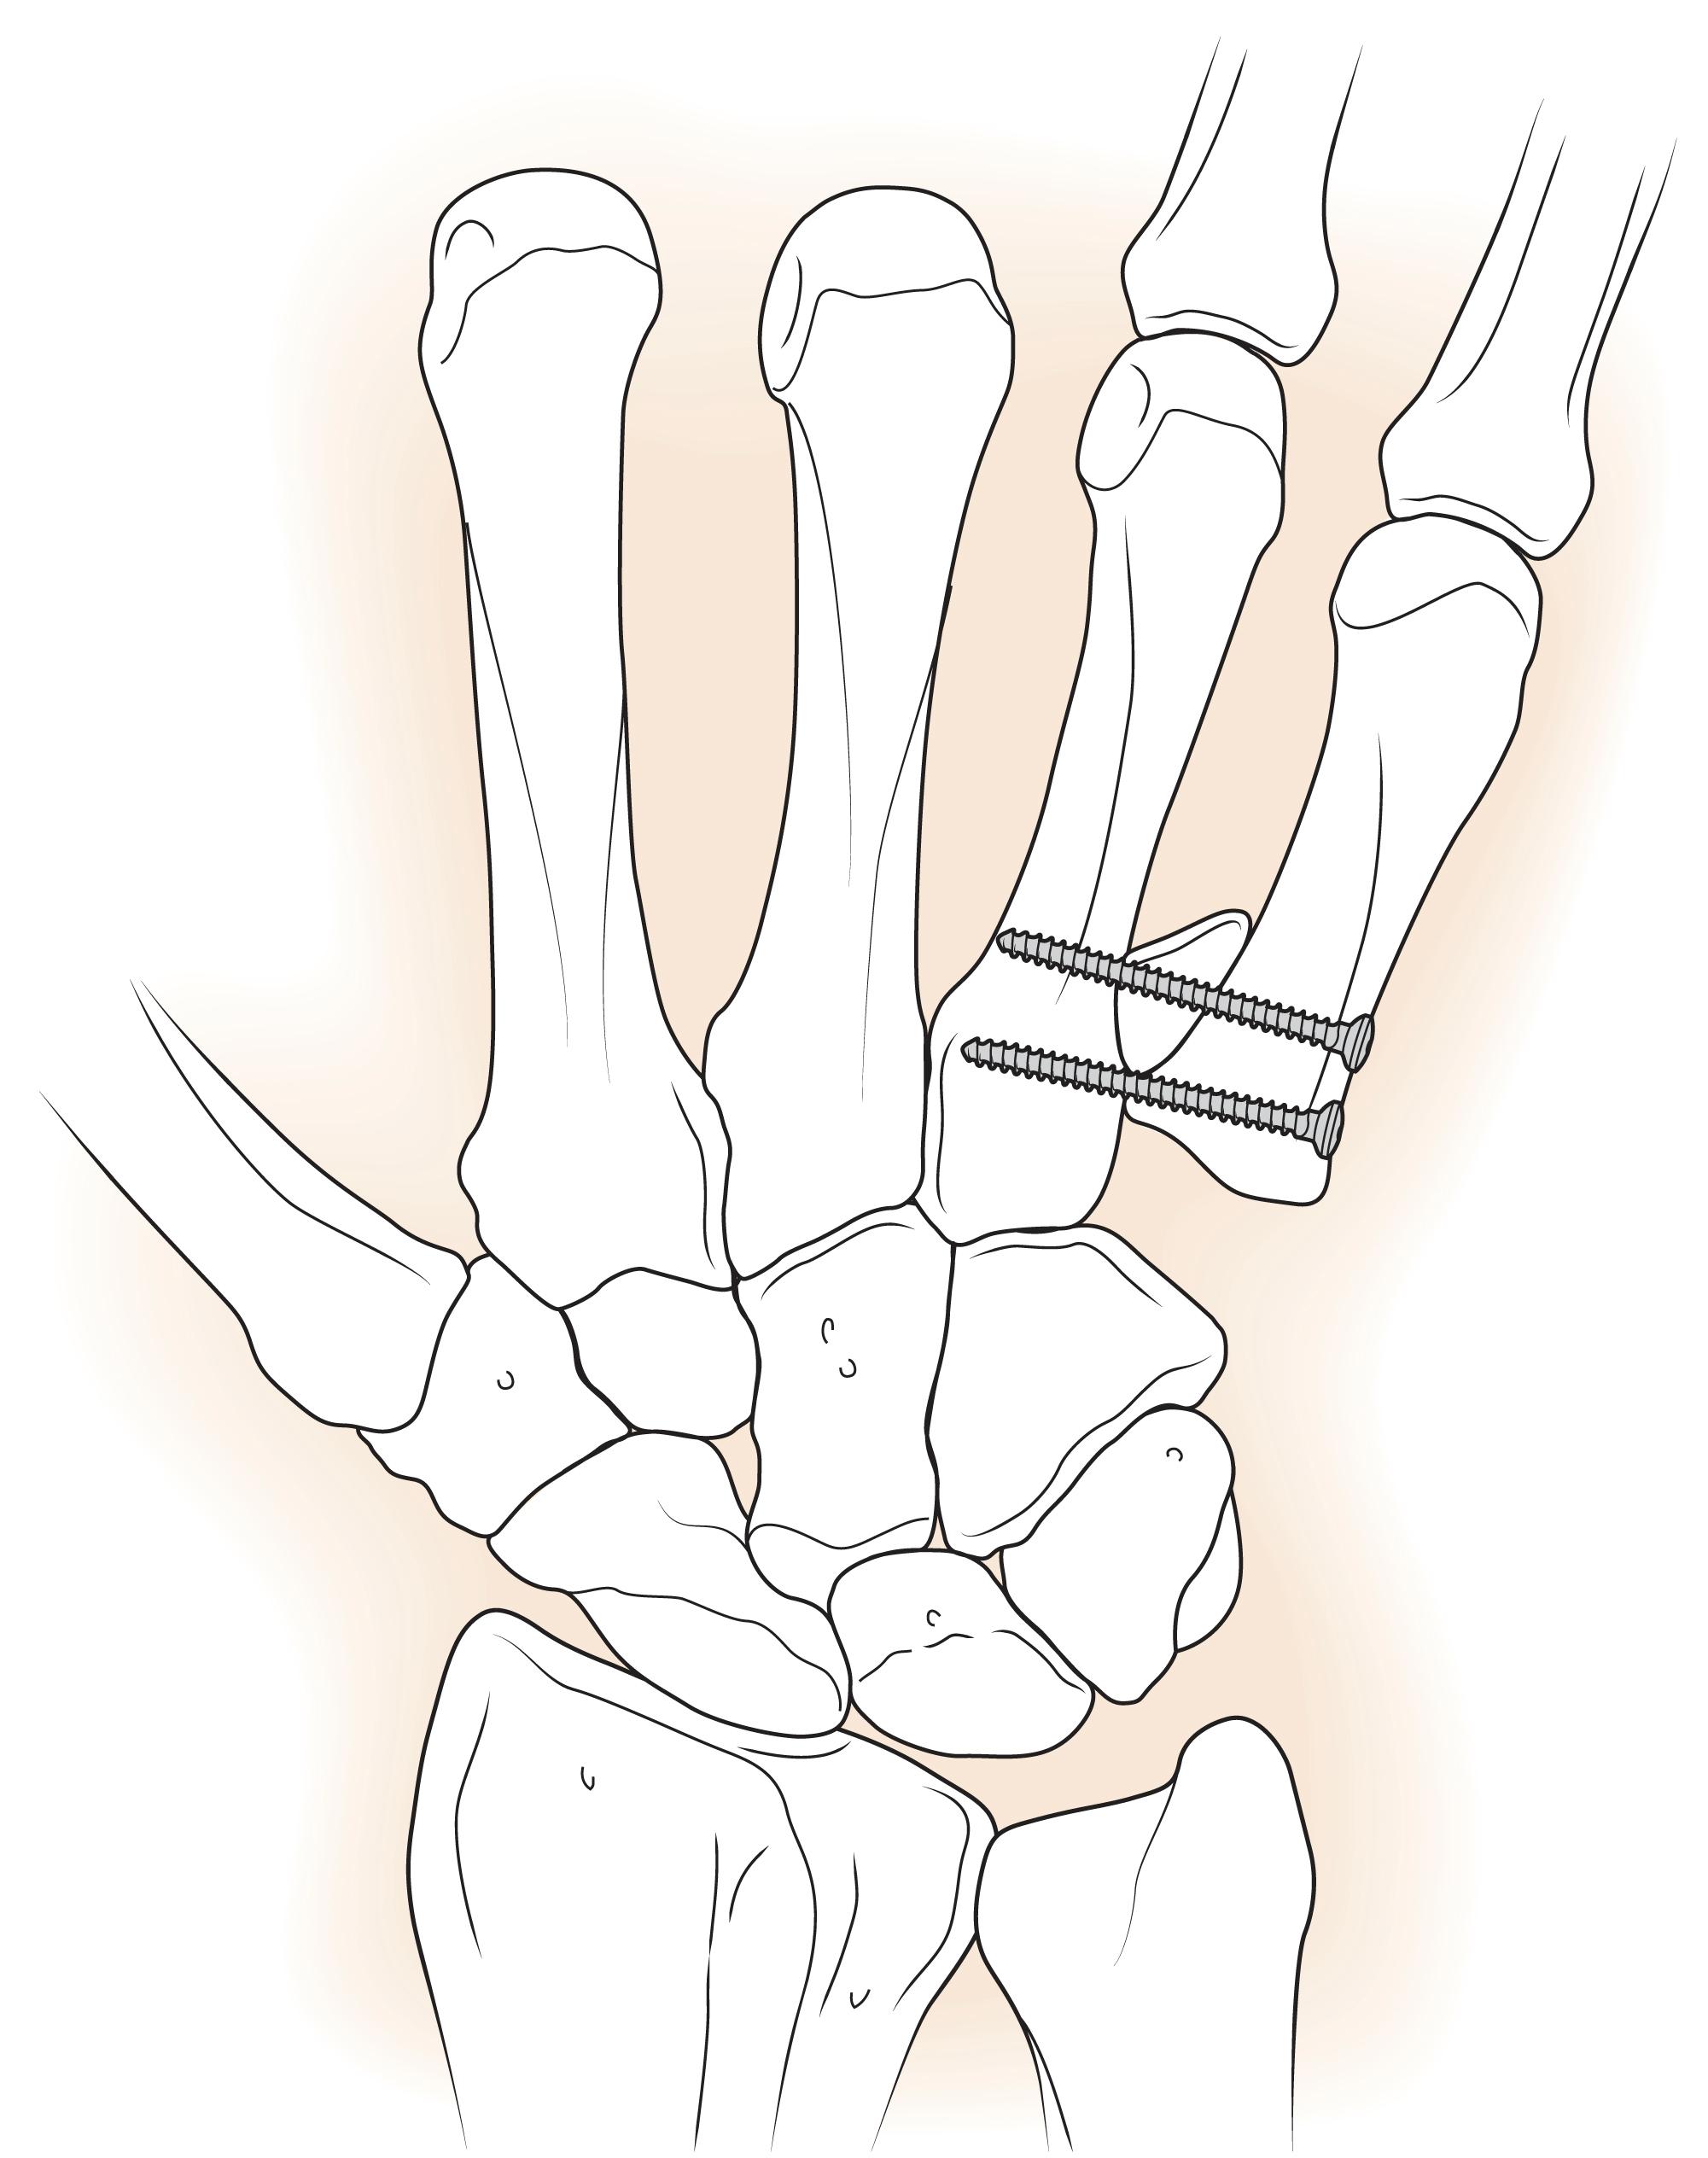 Fig. 7.23, Schematic drawing of the Dubert procedure involving resection of the fifth metacarpal base with side to side fusion of the fourth and fifth metacarpals.